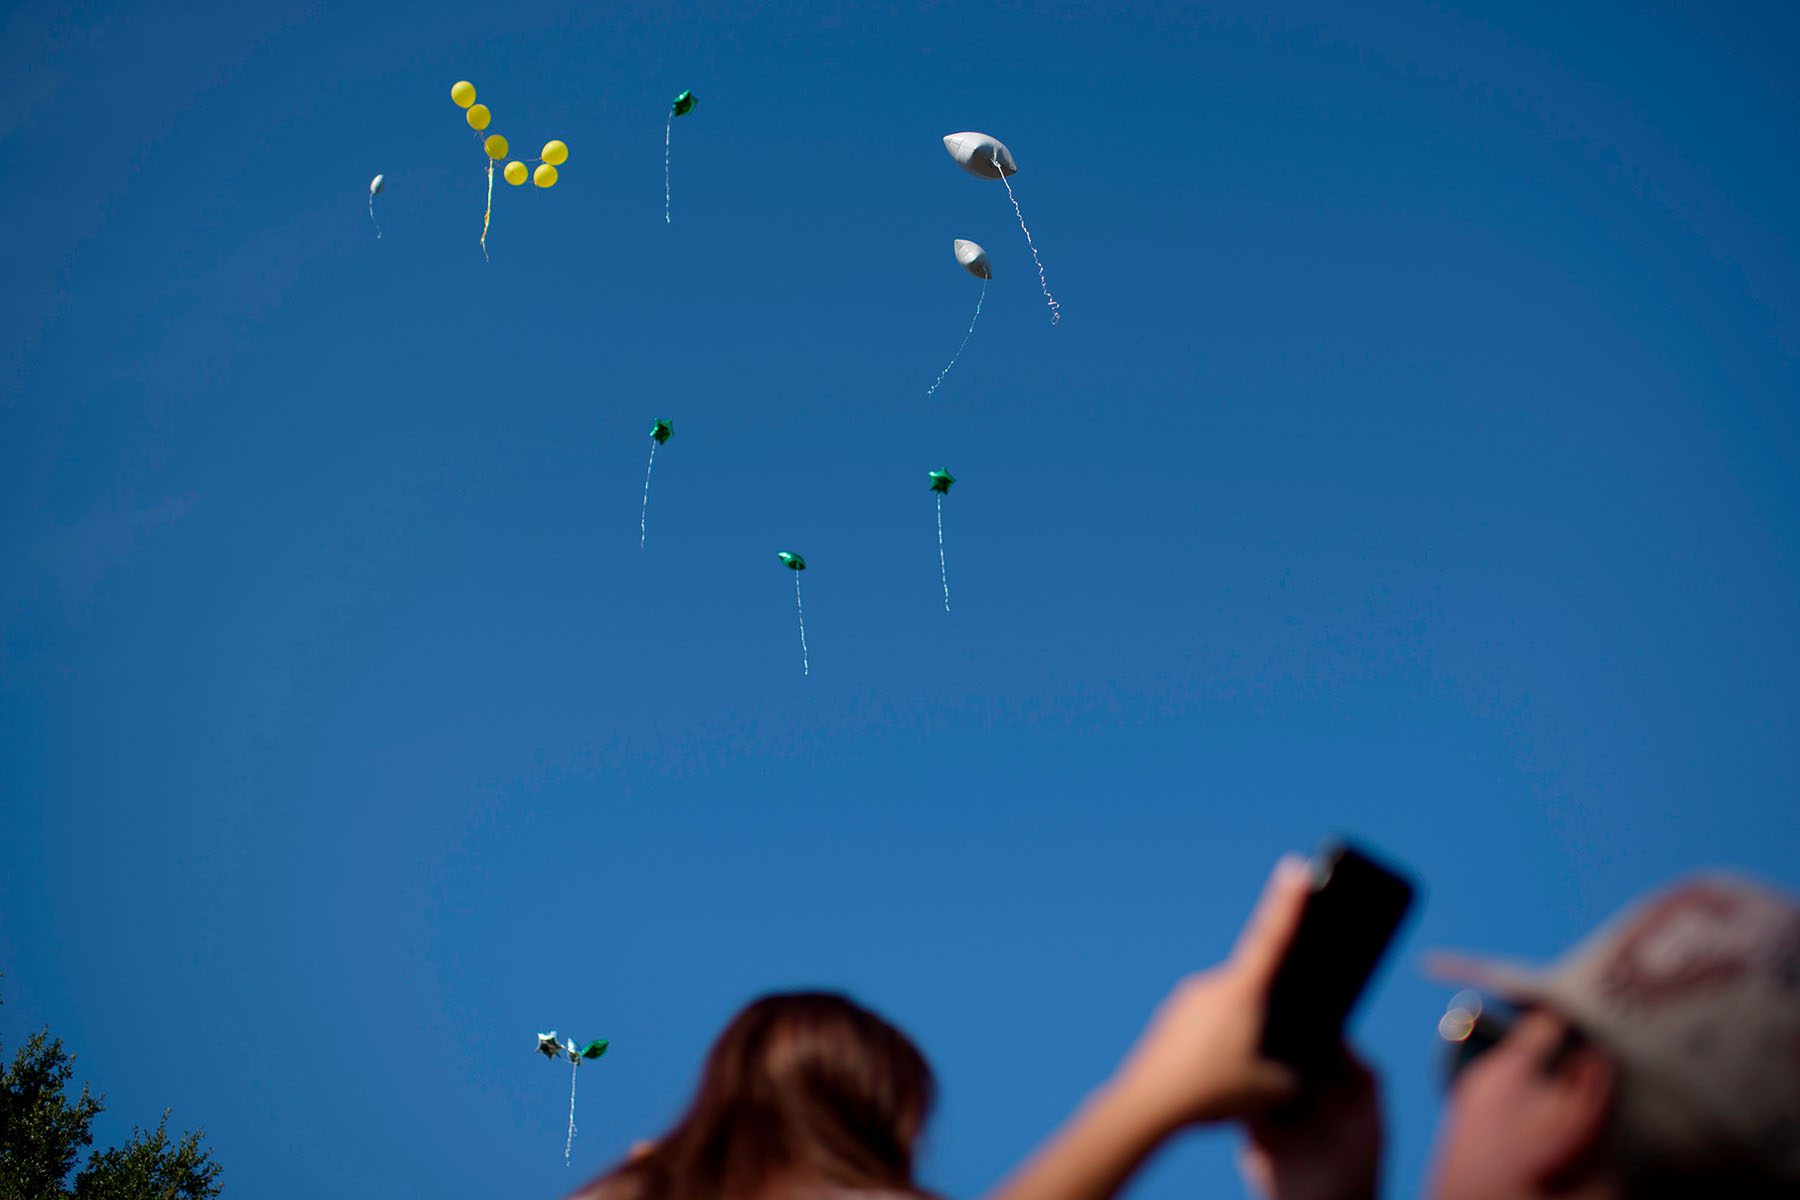 Star shaped balloons float away towards a blue sky as people look up and take photos on their cellphones.